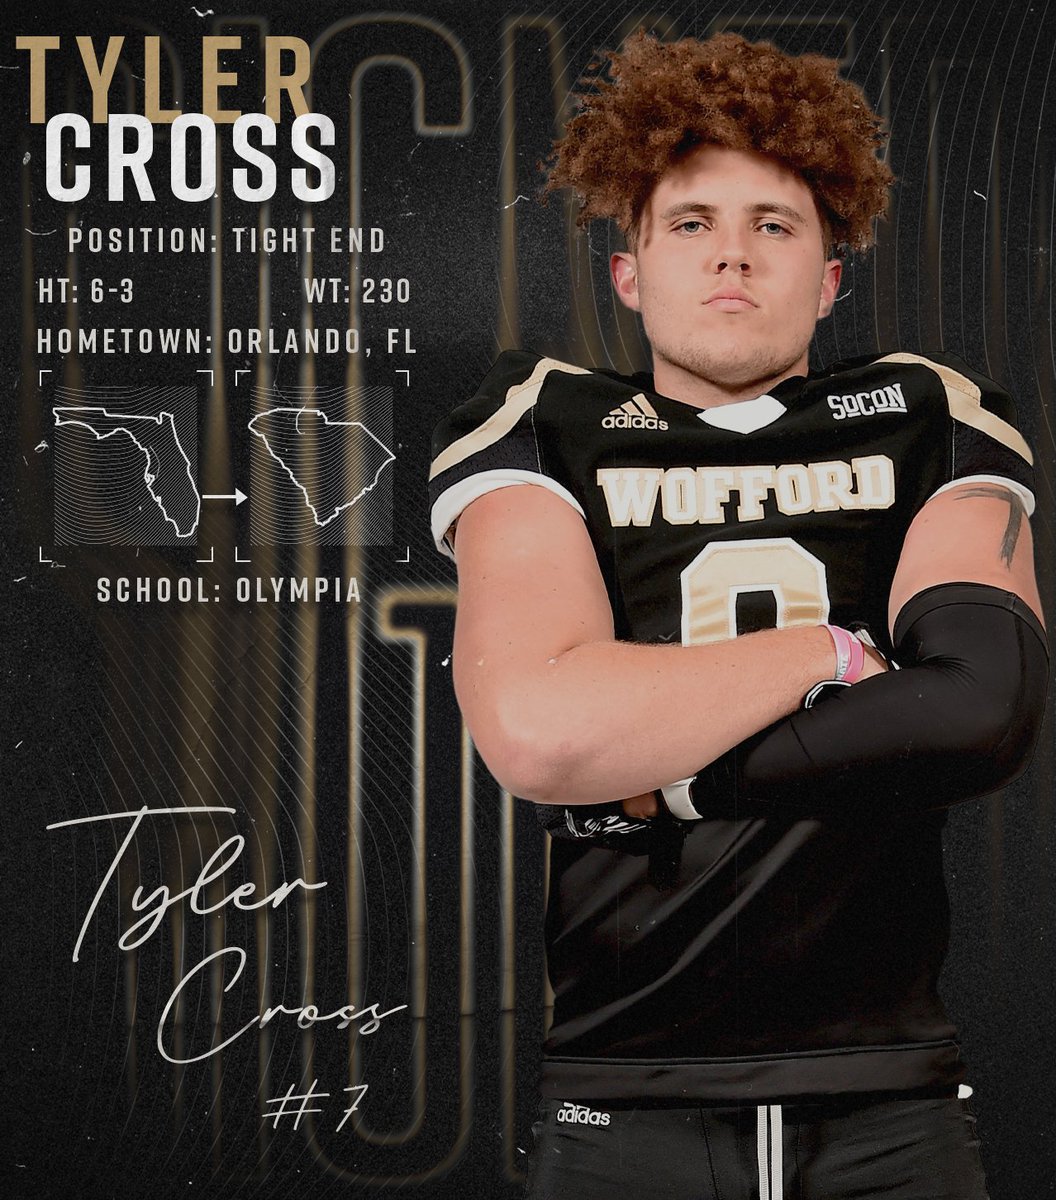 The first new Terrier this morning - a tight end from Orlando, Florida, Tyler Cross. Welcome to Wofford!